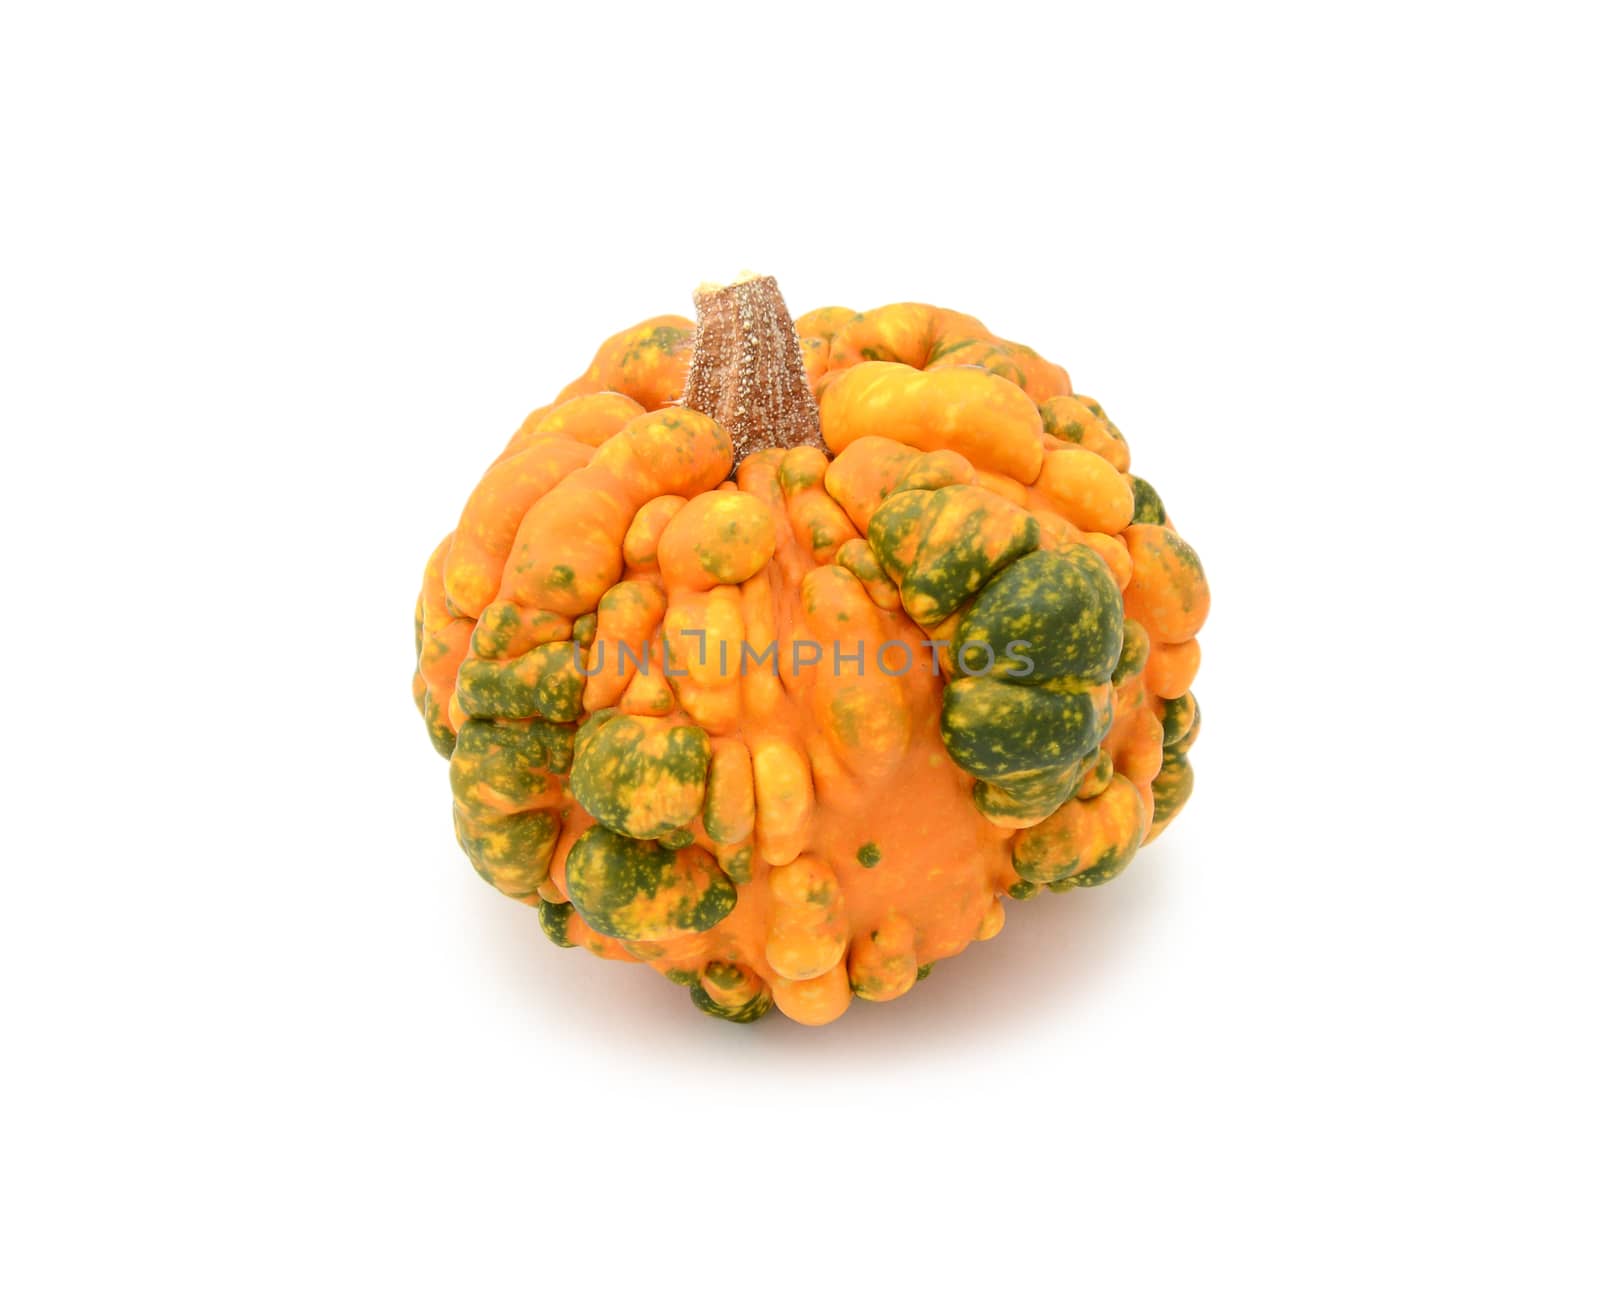 Deep orange gourd with green patches and warty skin as Thanksgiving decoration, on a white background